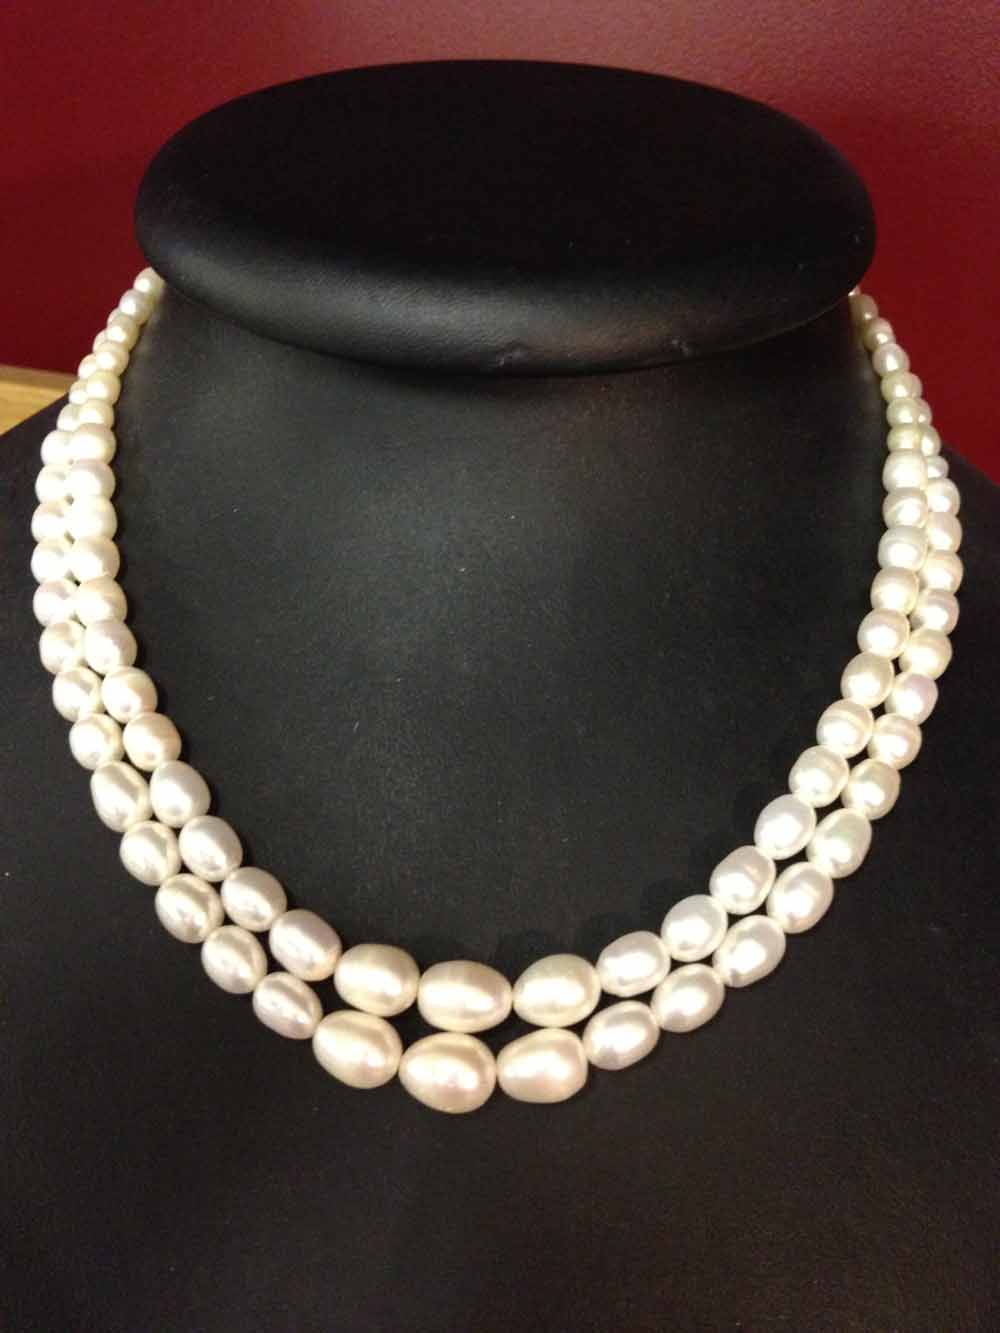 Double string freshwater pearl necklace, pearls of oval shape with graduated sizes.